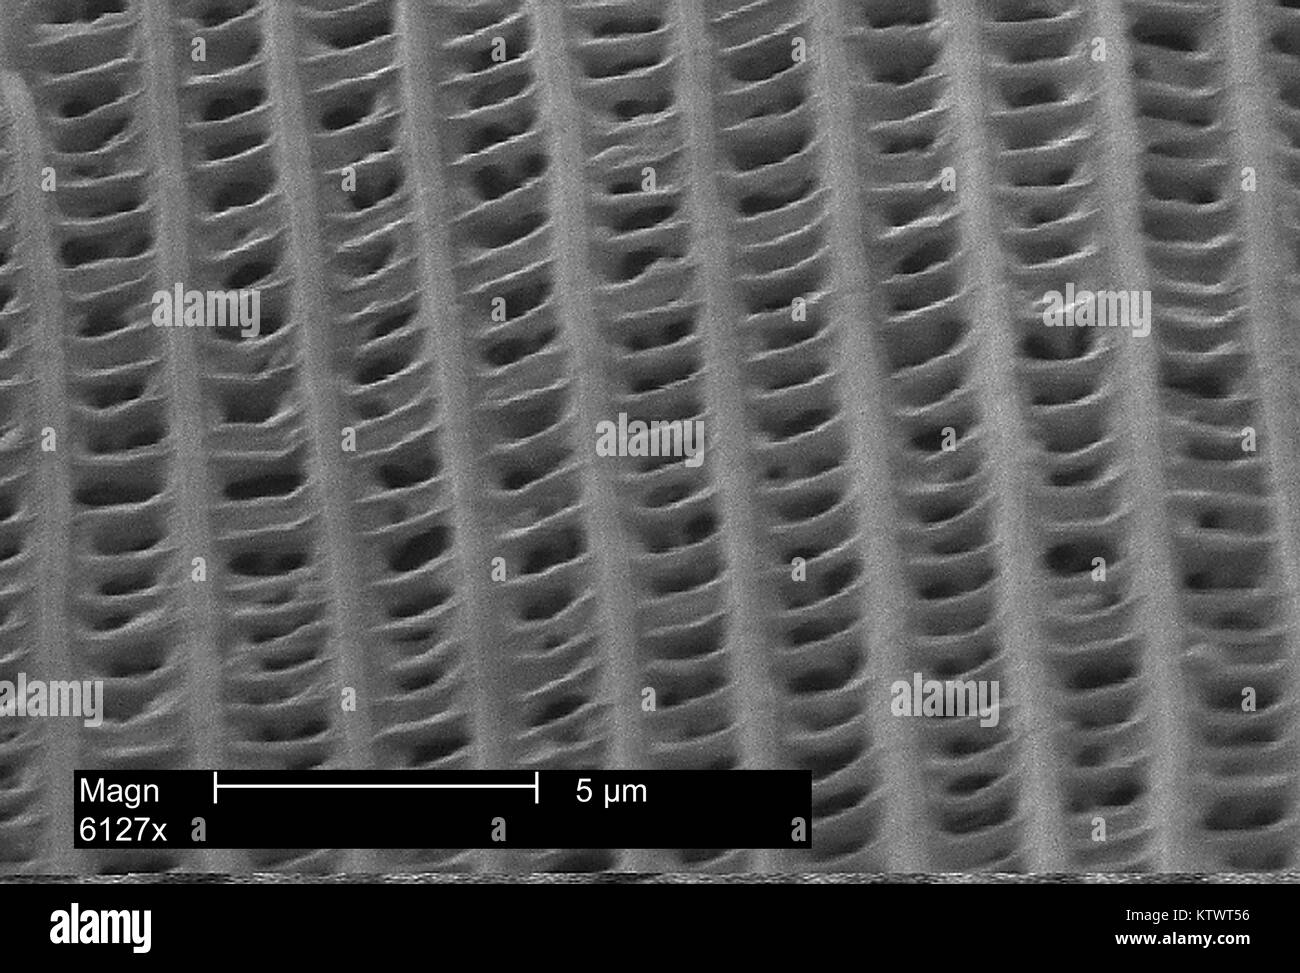 This scanning electron micrograph (SEM) depicts the strut-like construction of a single scale from a butterfly's wing, magnified 6127X. Note the struts and perforations of the individual scale. This helps to promote heightened aerodynamic lift during the insect's flight, as well as reduce the weight of the wing mechanism. Image courtesy CDC, 2002. Stock Photo